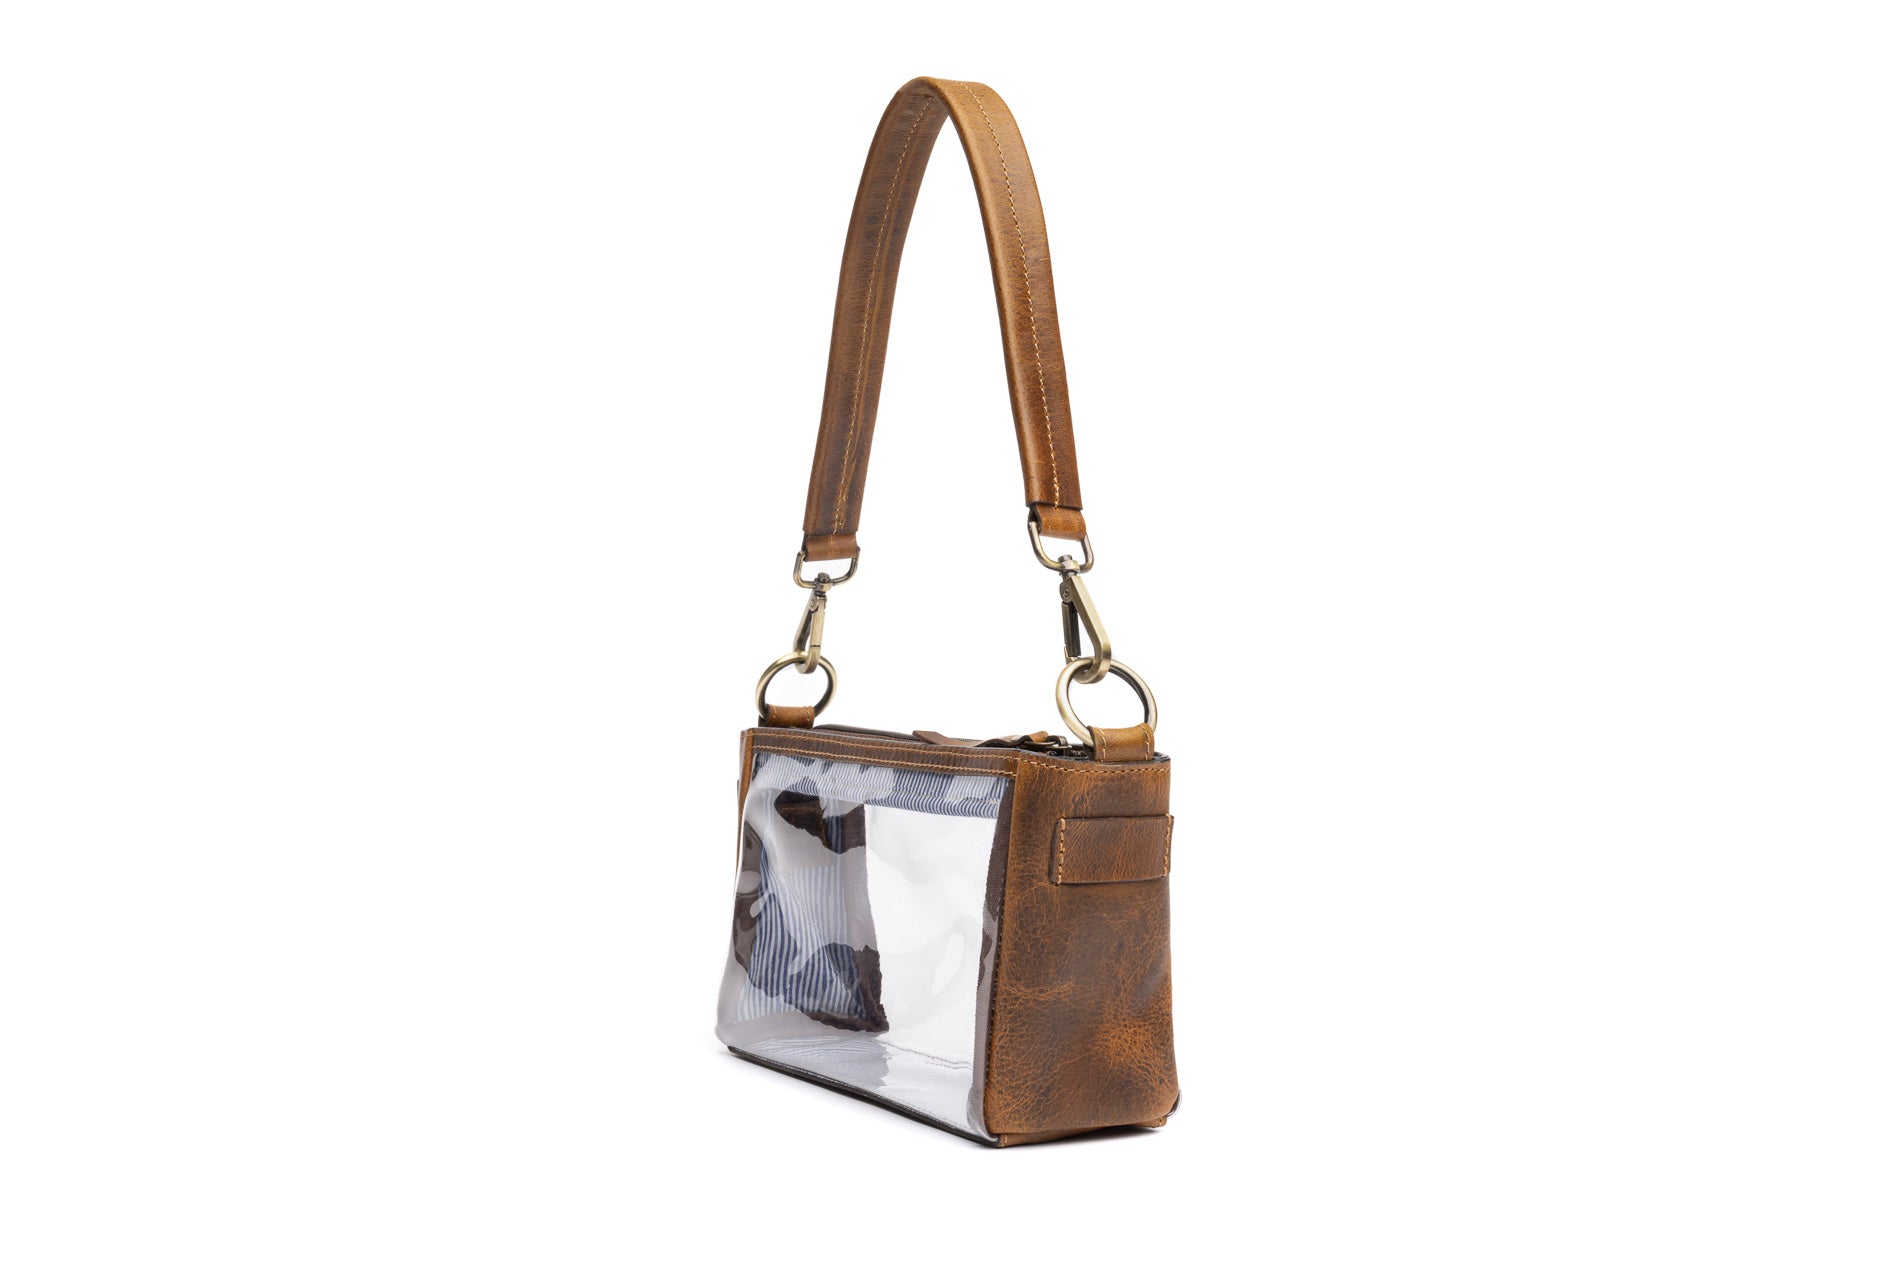 Leather Clear Purse for stylish and elevated fashion at clear bag venues.